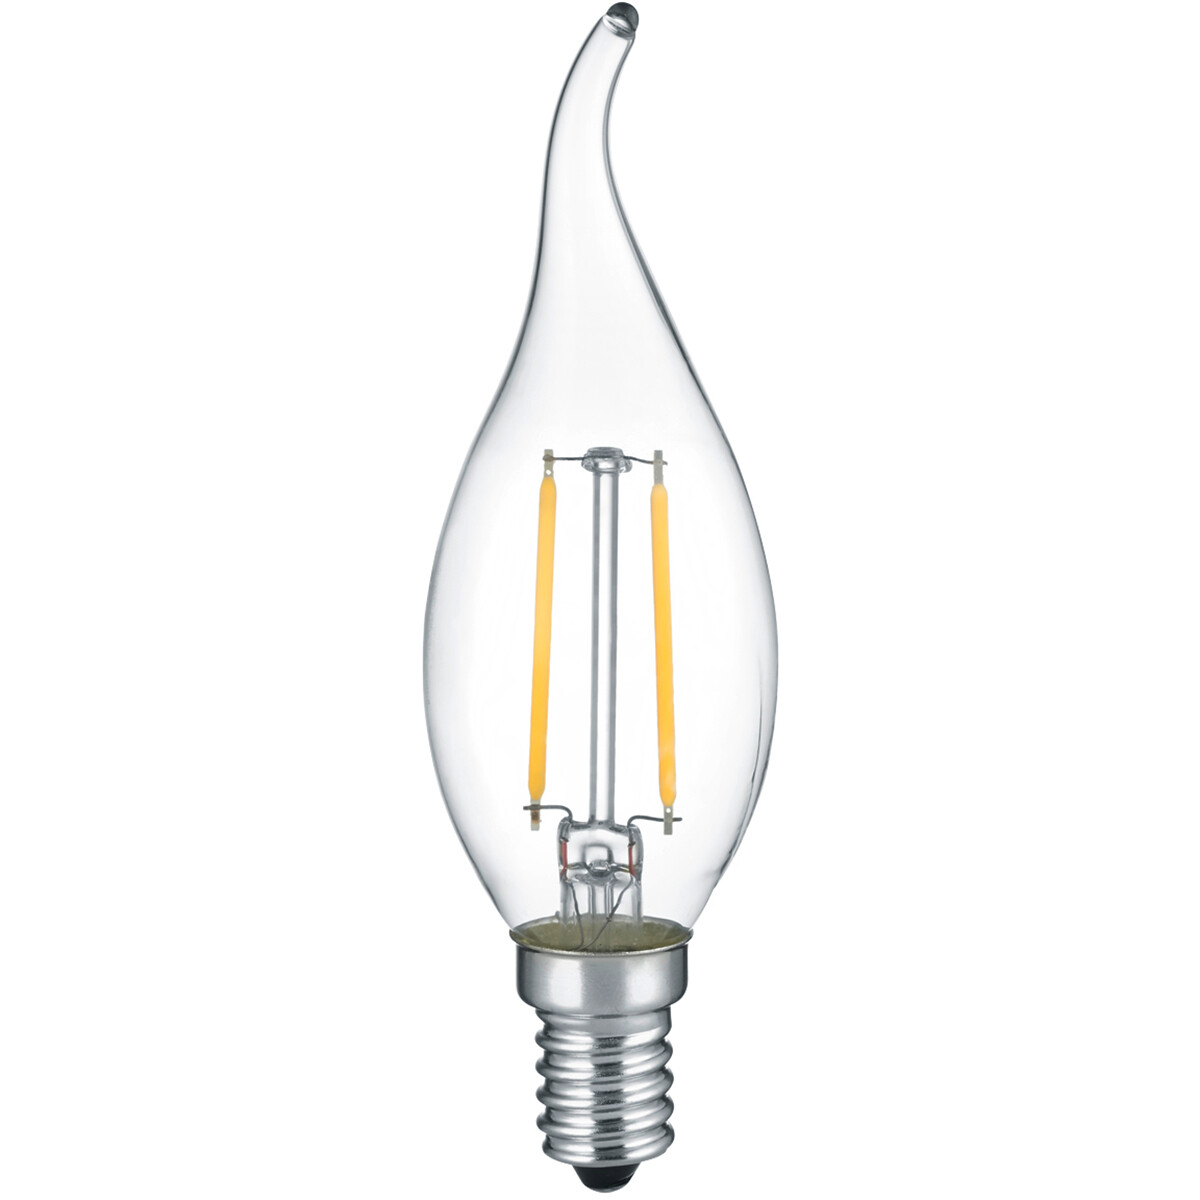 LED Lamp - Kaarslamp - Filament - Trion Kirza - E14 Fitting - 2W - Warm Wit-2700K - Transparant Held